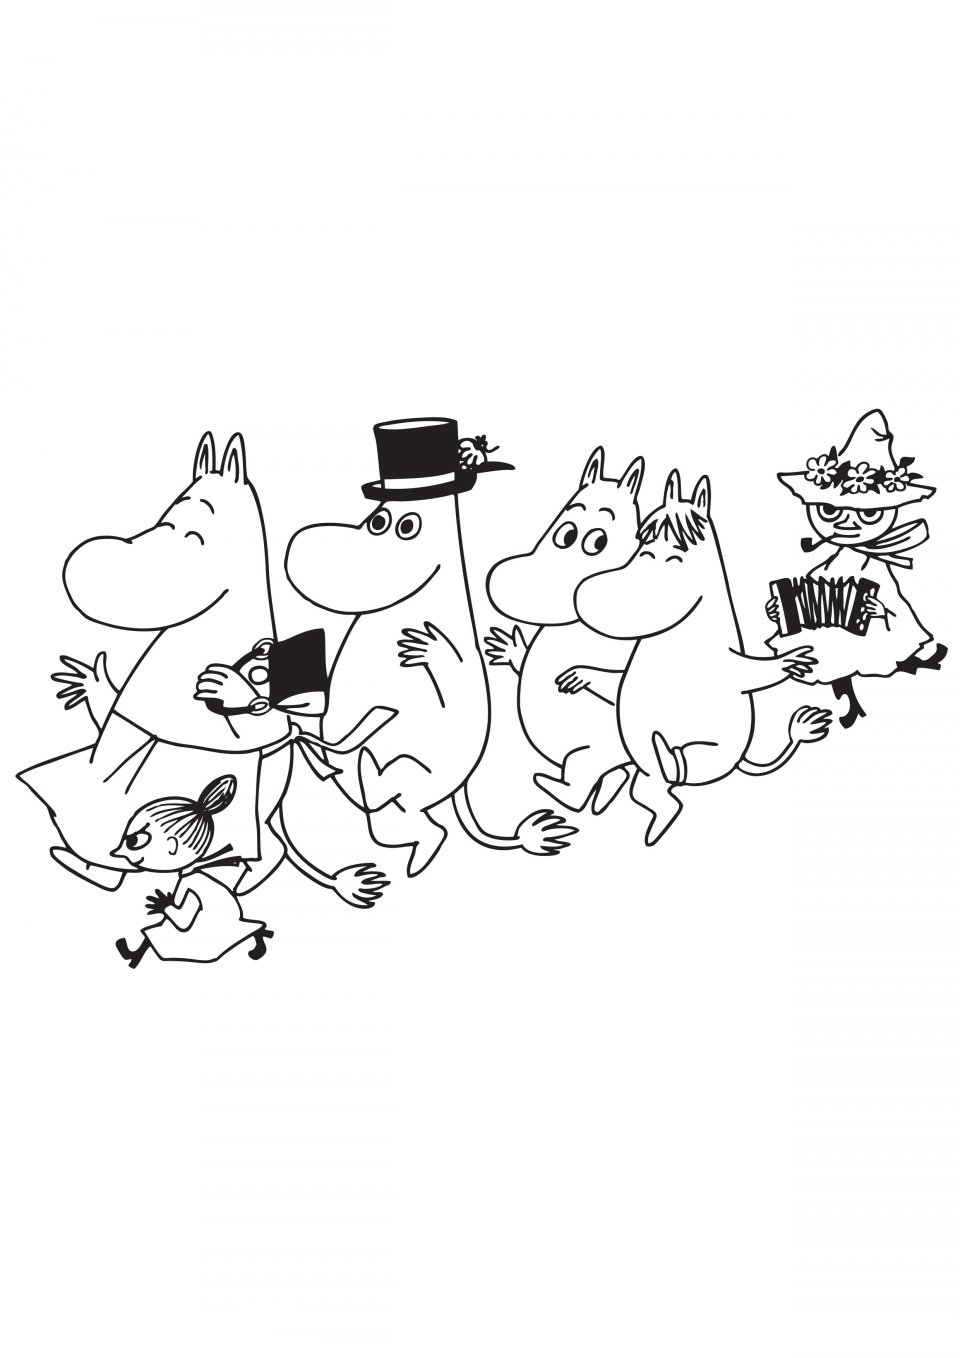 Moomin coloring pages to download and print for free